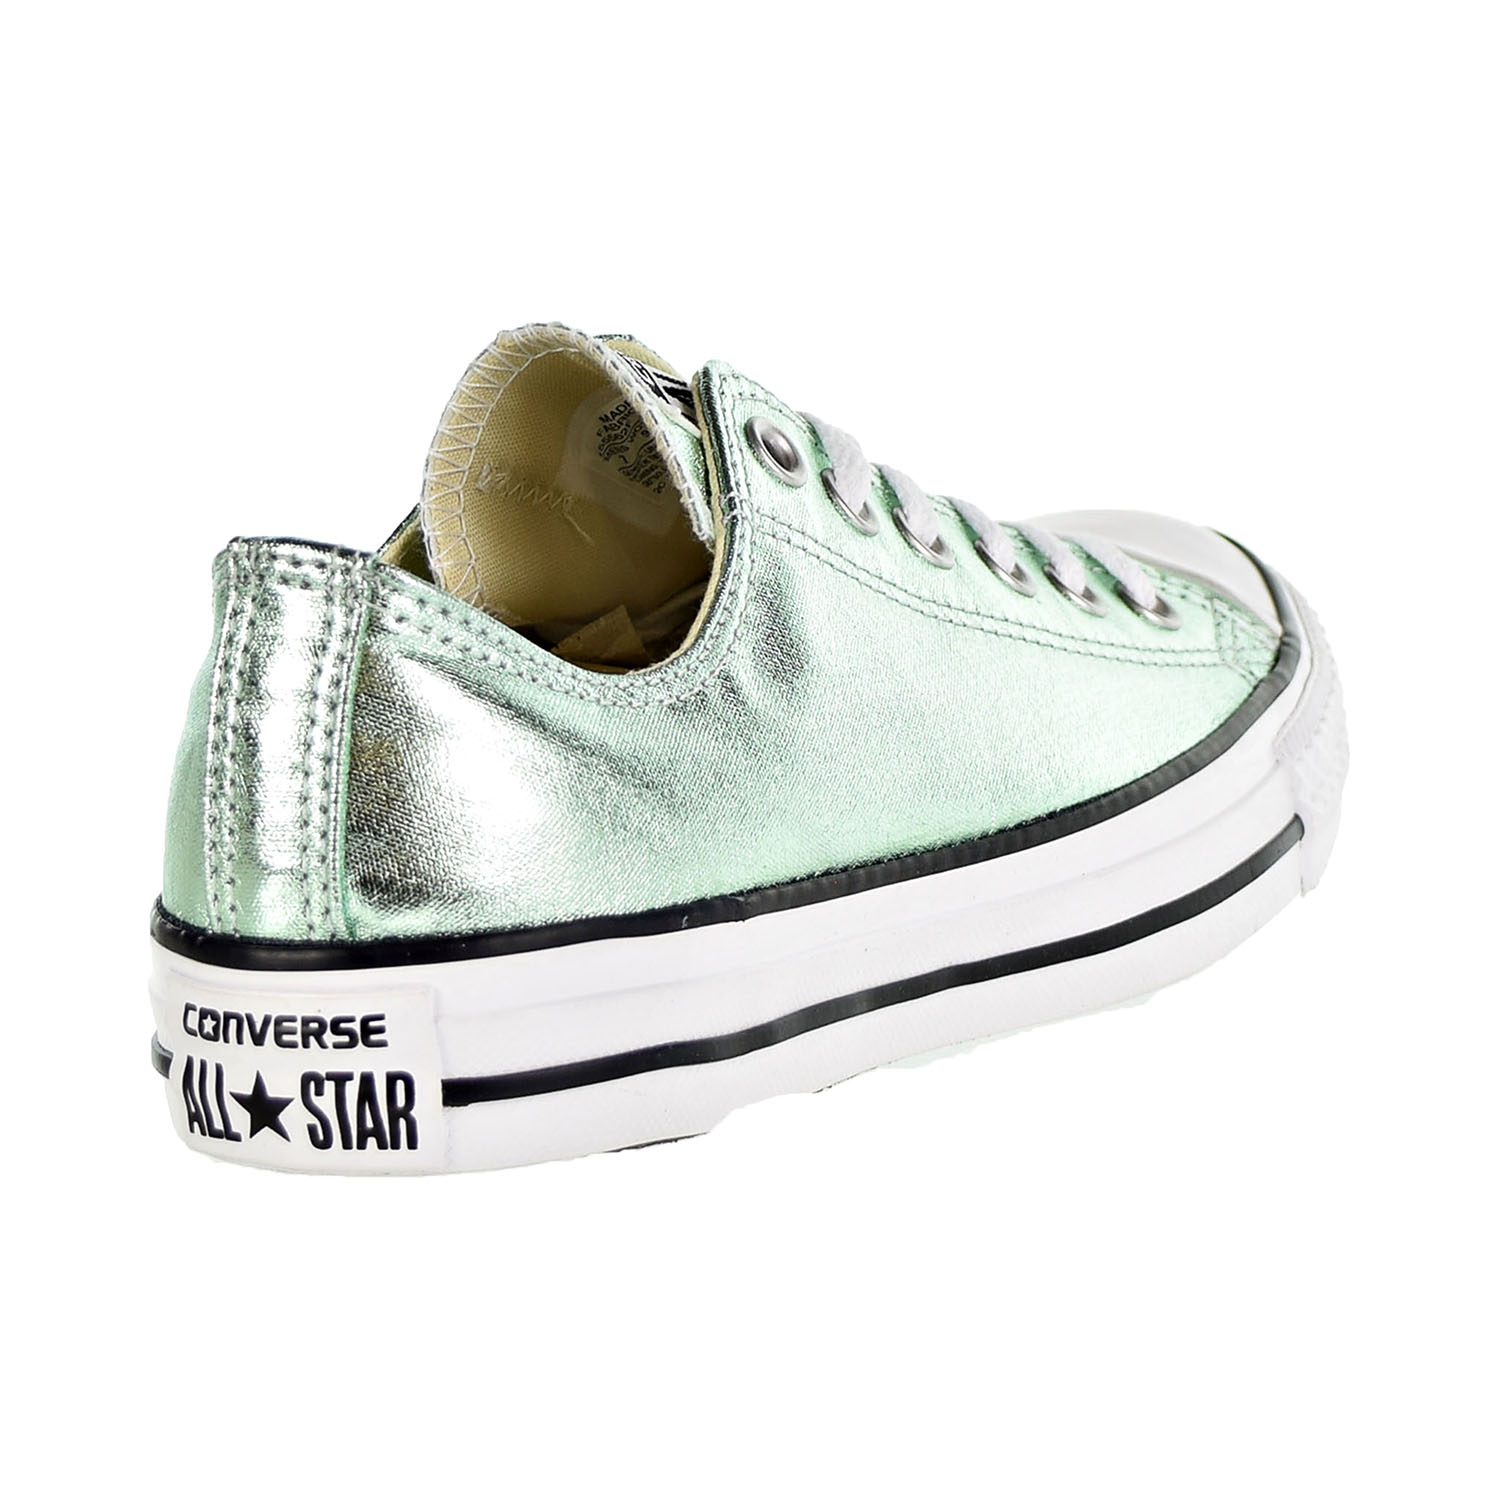 Converse Chuck Taylor All Star Ox Men's Shoes Jade-Black-White 155562f - image 3 of 6